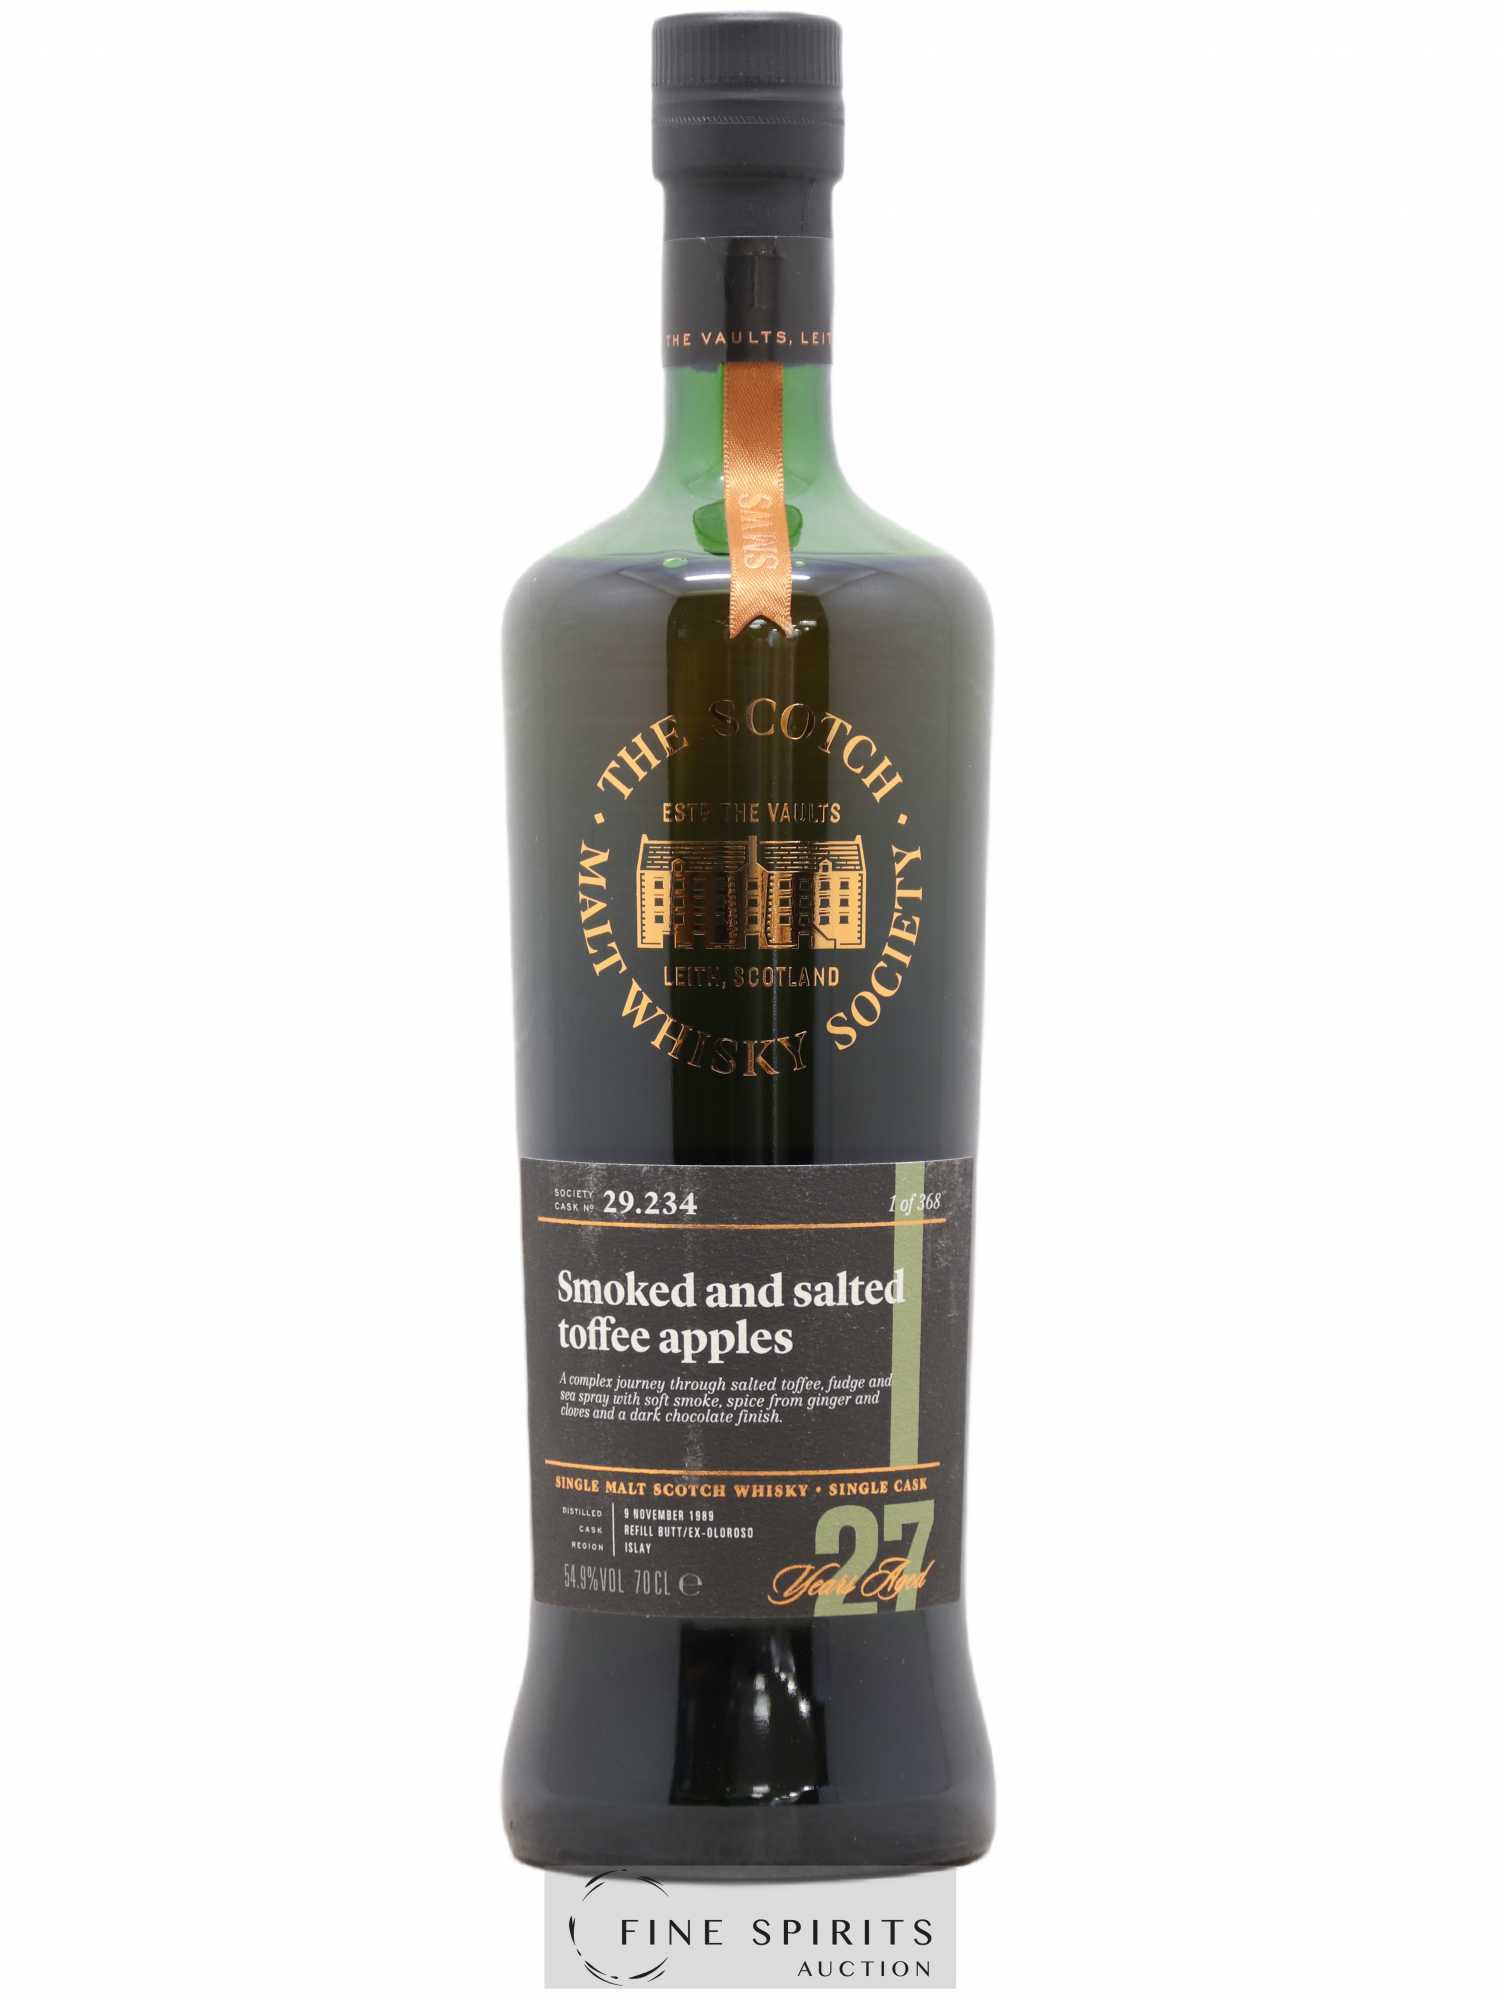 Smoked and Salted Toffee Apples 27 years 1989 The Scotch Malt Whisky Society Cask n°29.234 - One of 368 